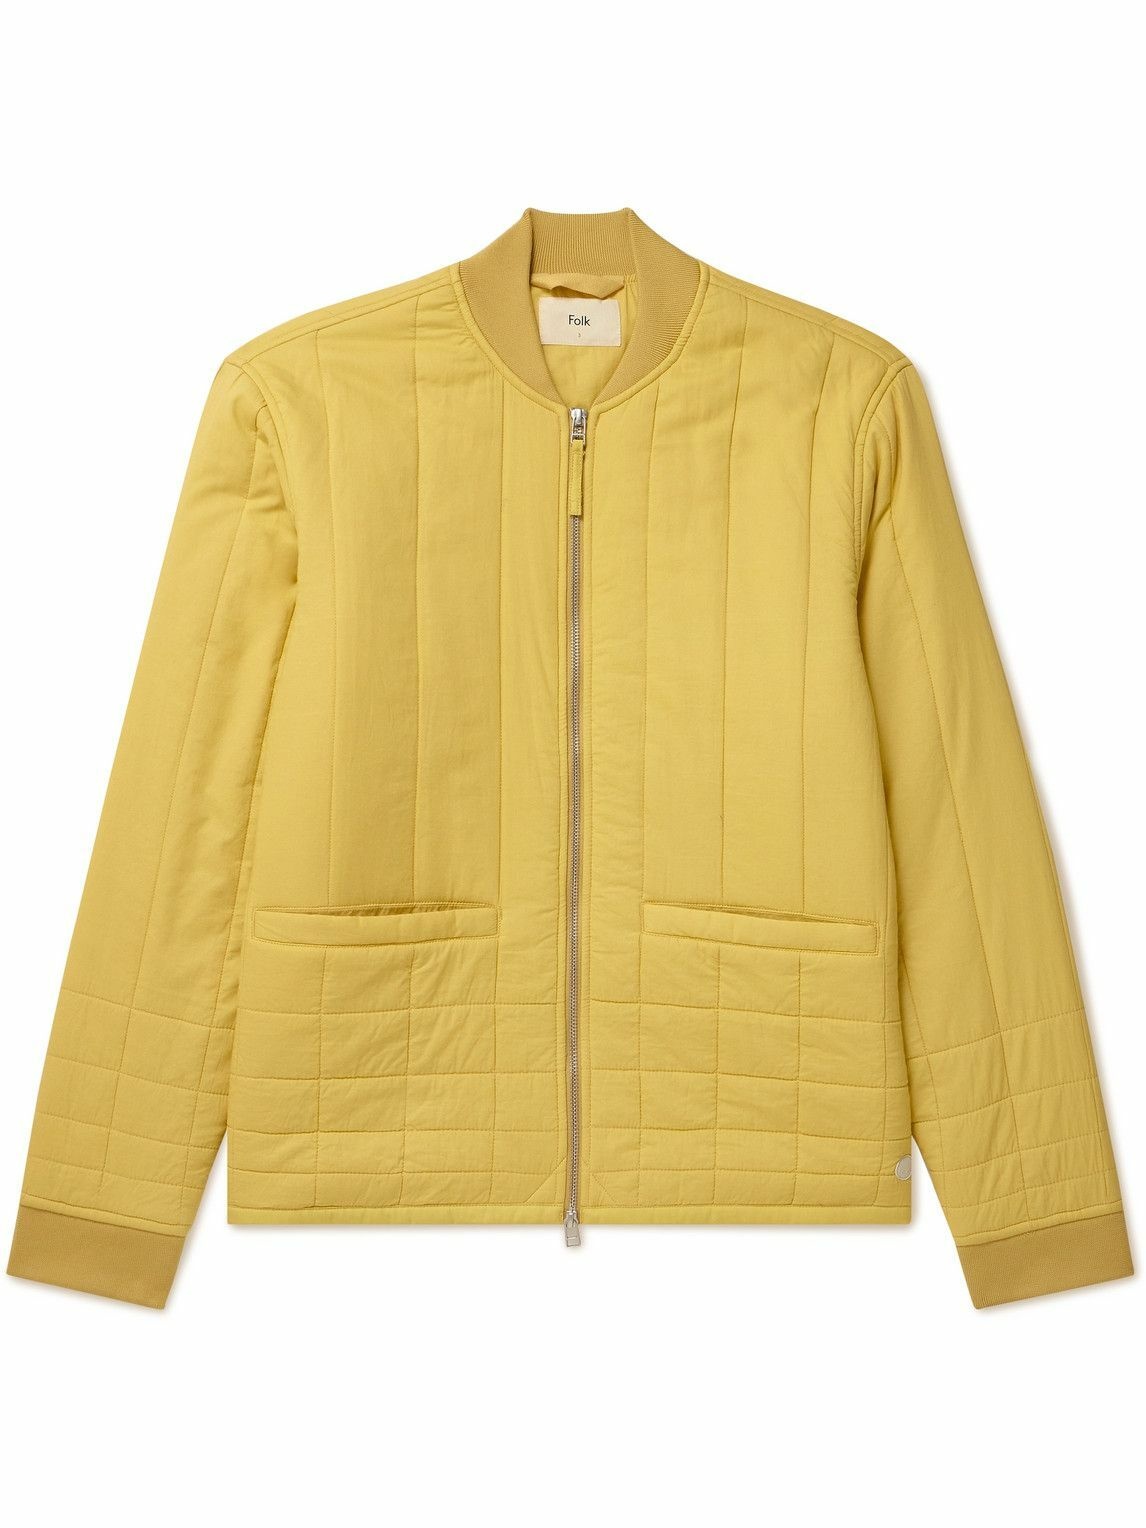 Folk - Cave Quilted Cotton Bomber Jacket - Yellow Folk